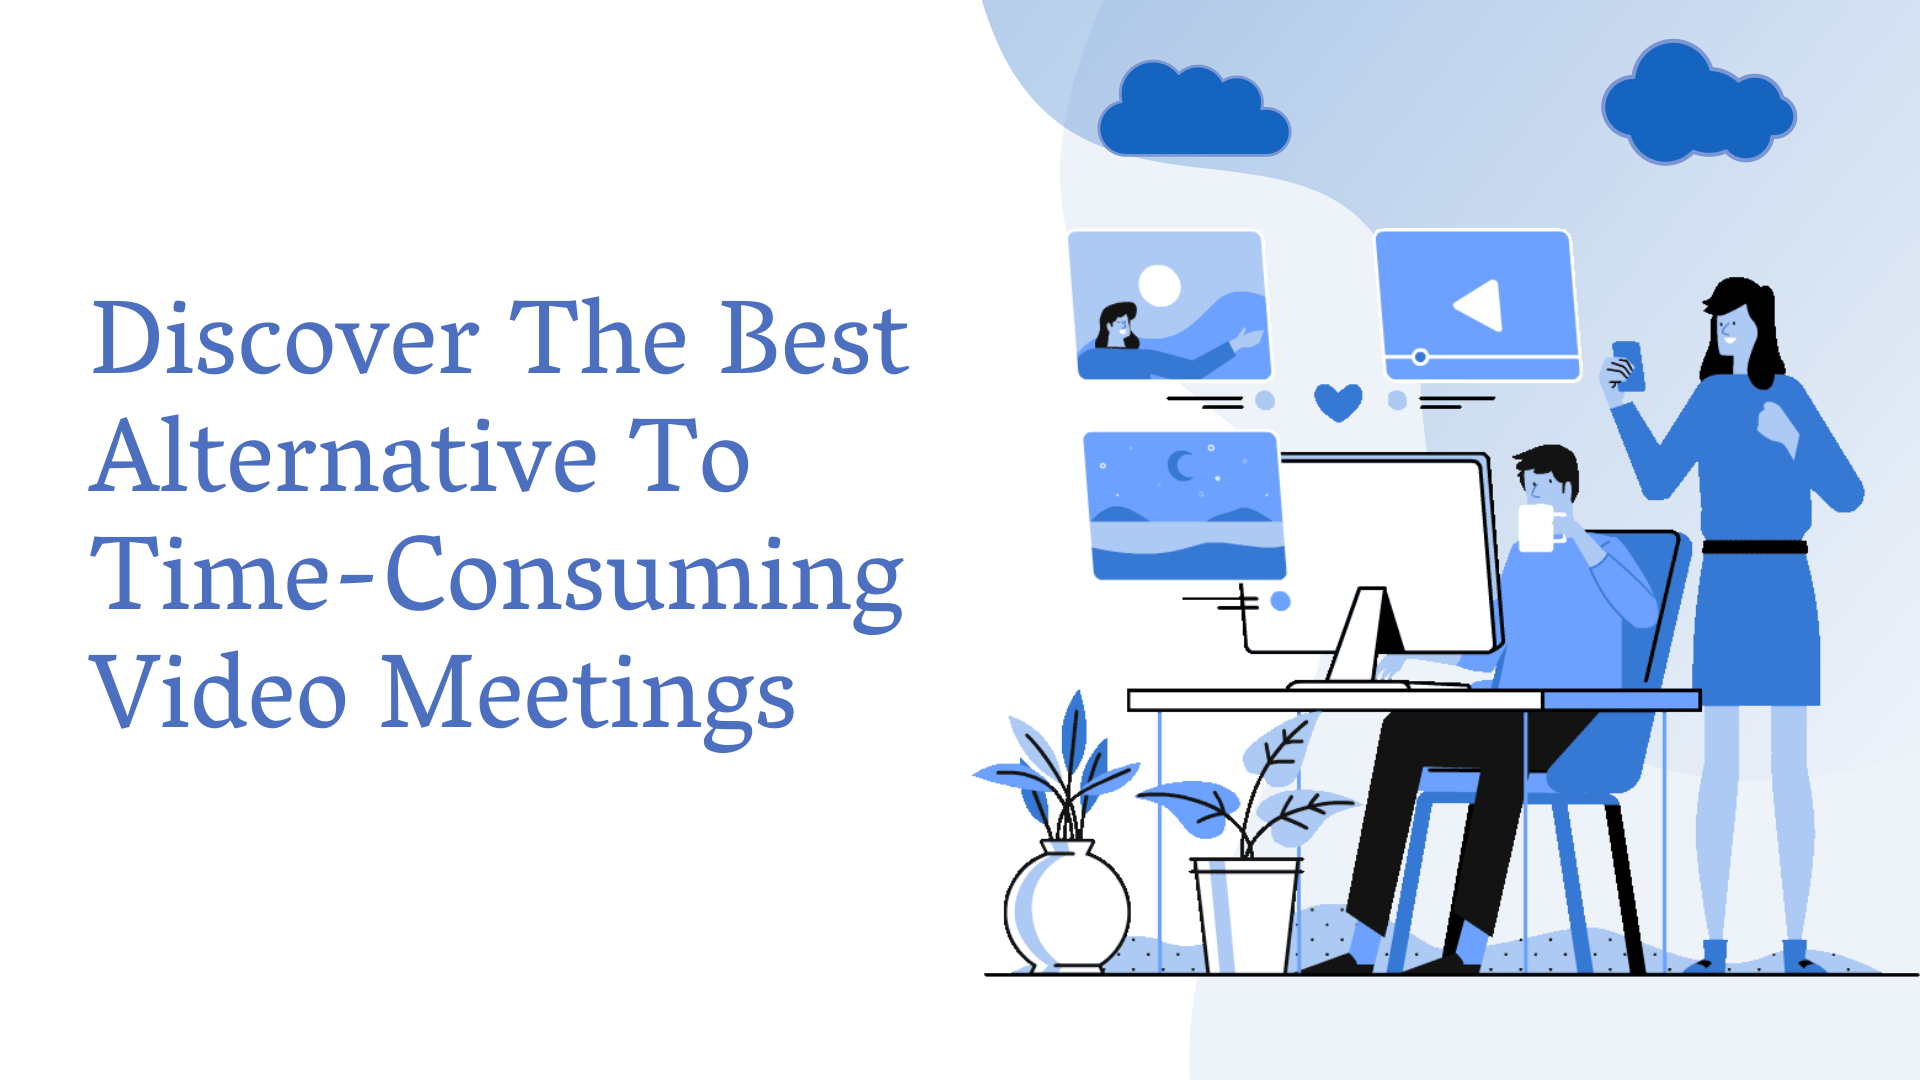 Revealed! The Best Alternative to Time-Consuming Video Meetings in 2023